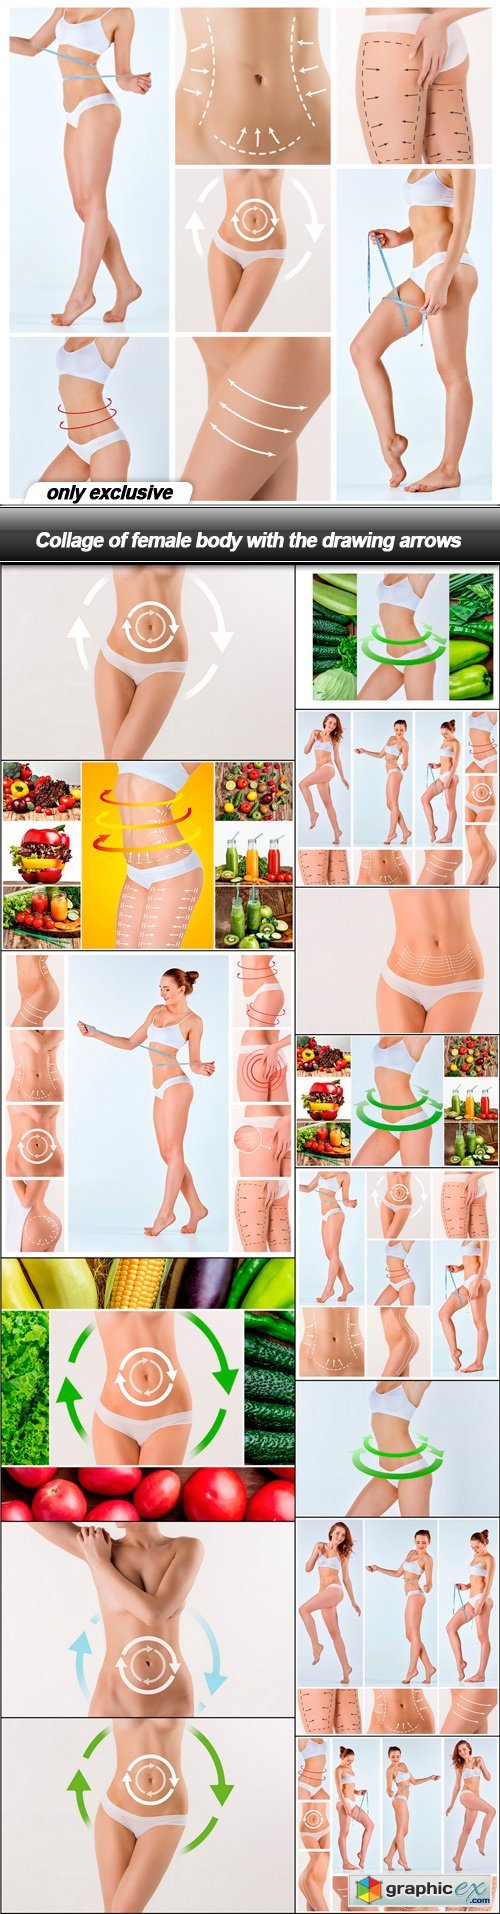 Collage of female body with the drawing arrows - 15 UHQ JPEG